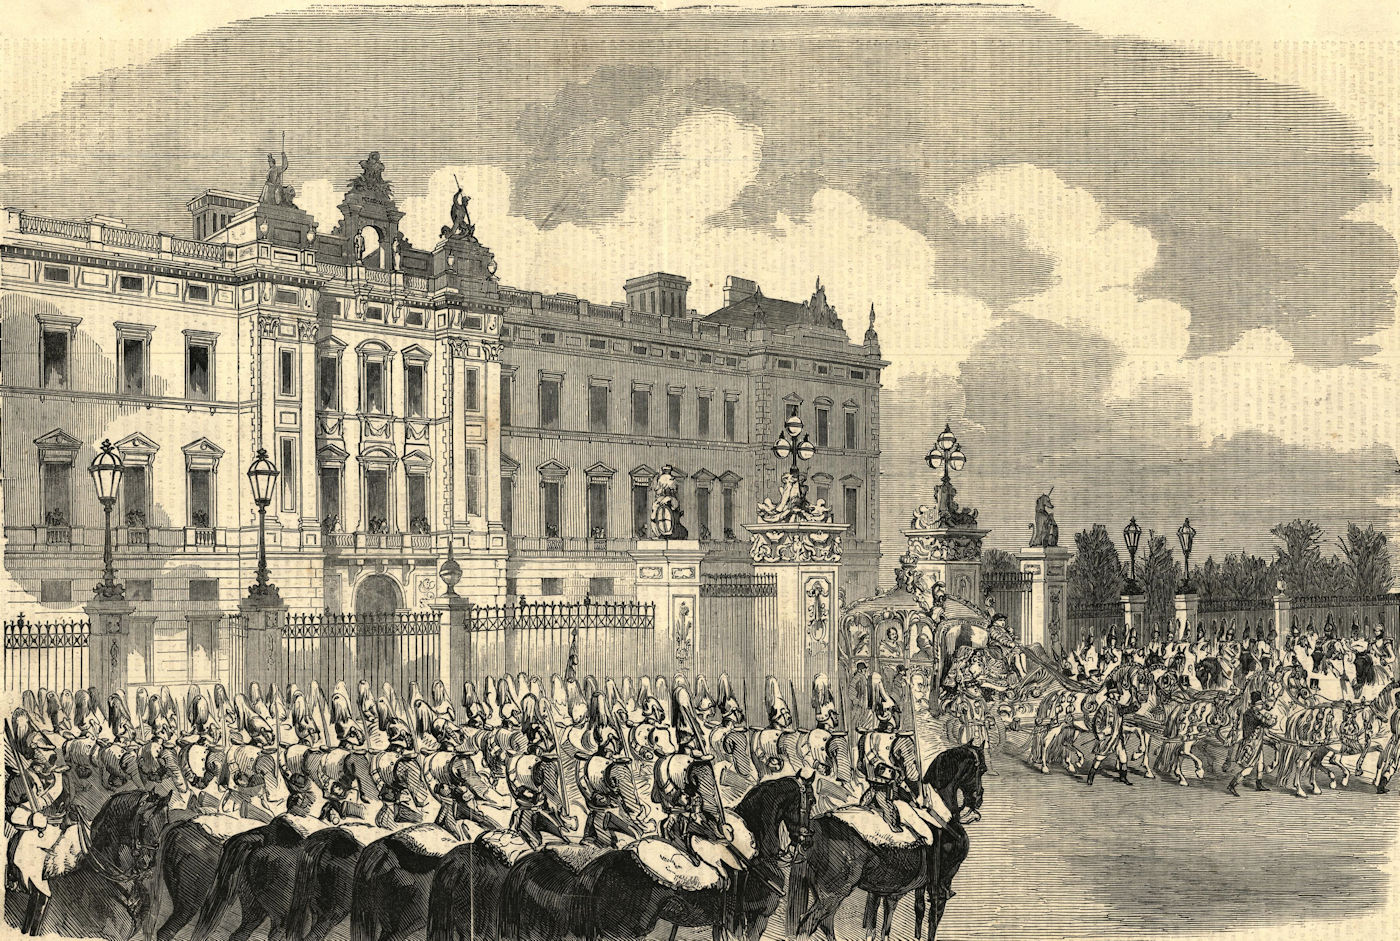 Associate Product Opening of Parliament - Her Majesty leaving Buckingham Palace. London 1854